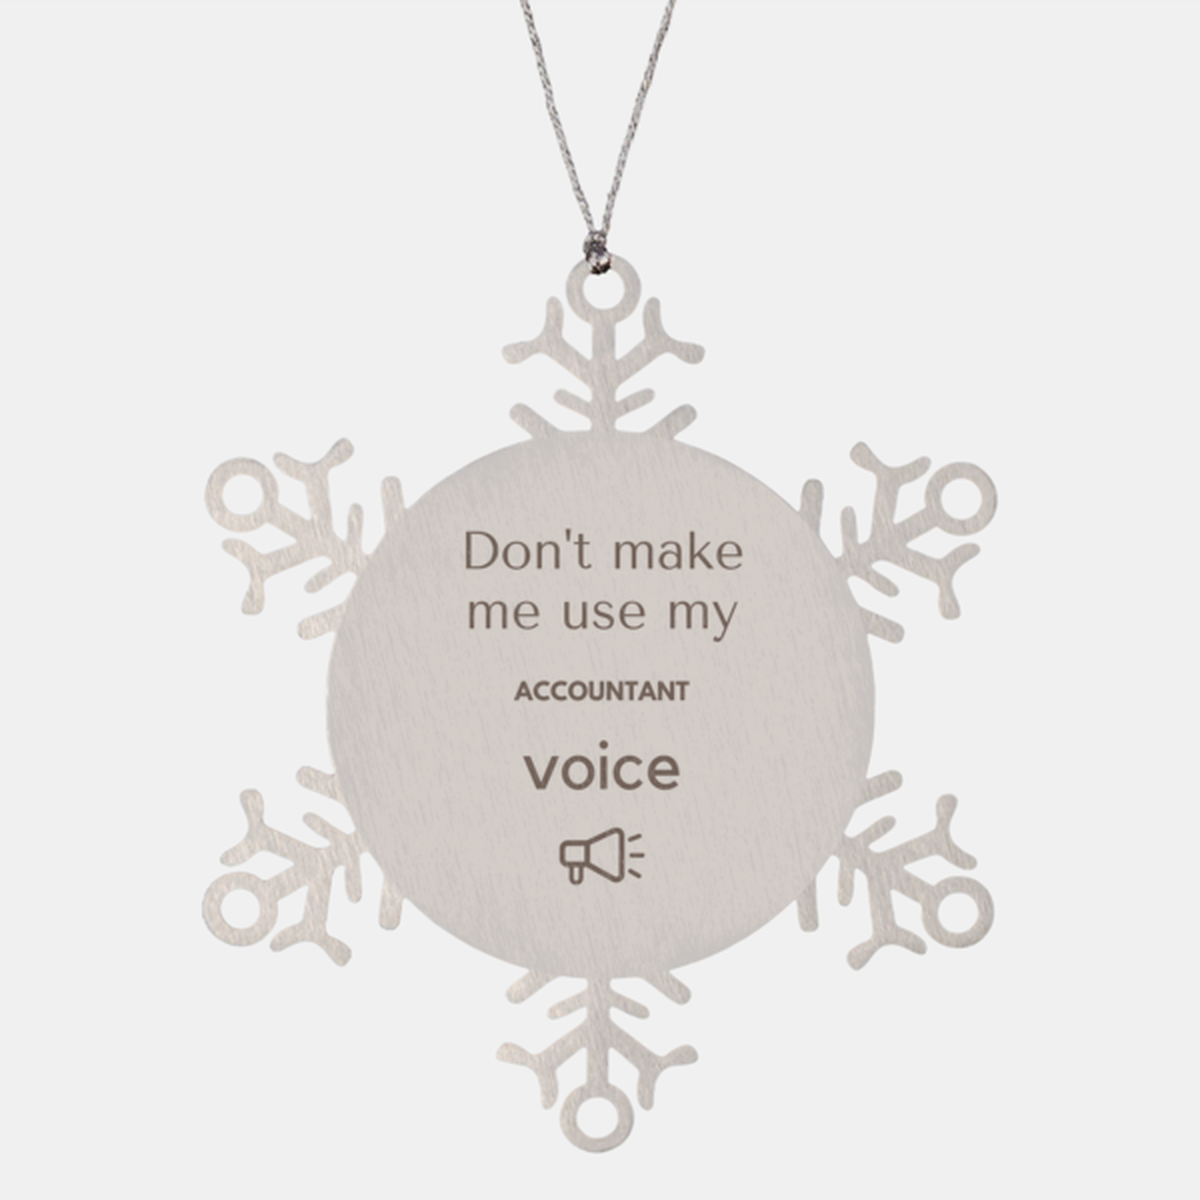 Don't make me use my Accountant voice, Sarcasm Accountant Ornament Gifts, Christmas Accountant Snowflake Ornament Unique Gifts For Accountant Coworkers, Men, Women, Colleague, Friends